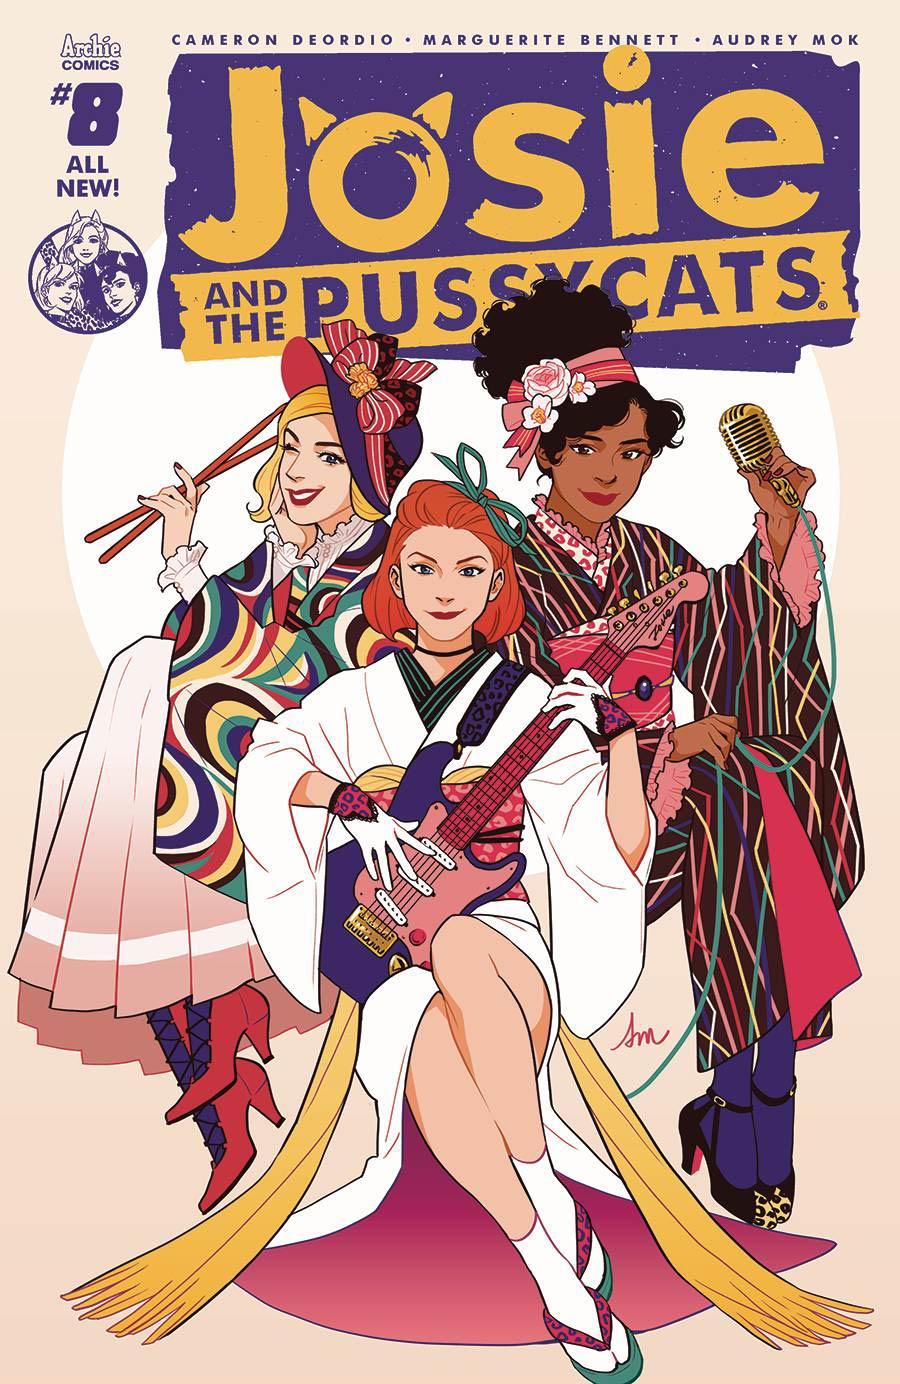 Josie And The Pussycats Vol. 2 #8